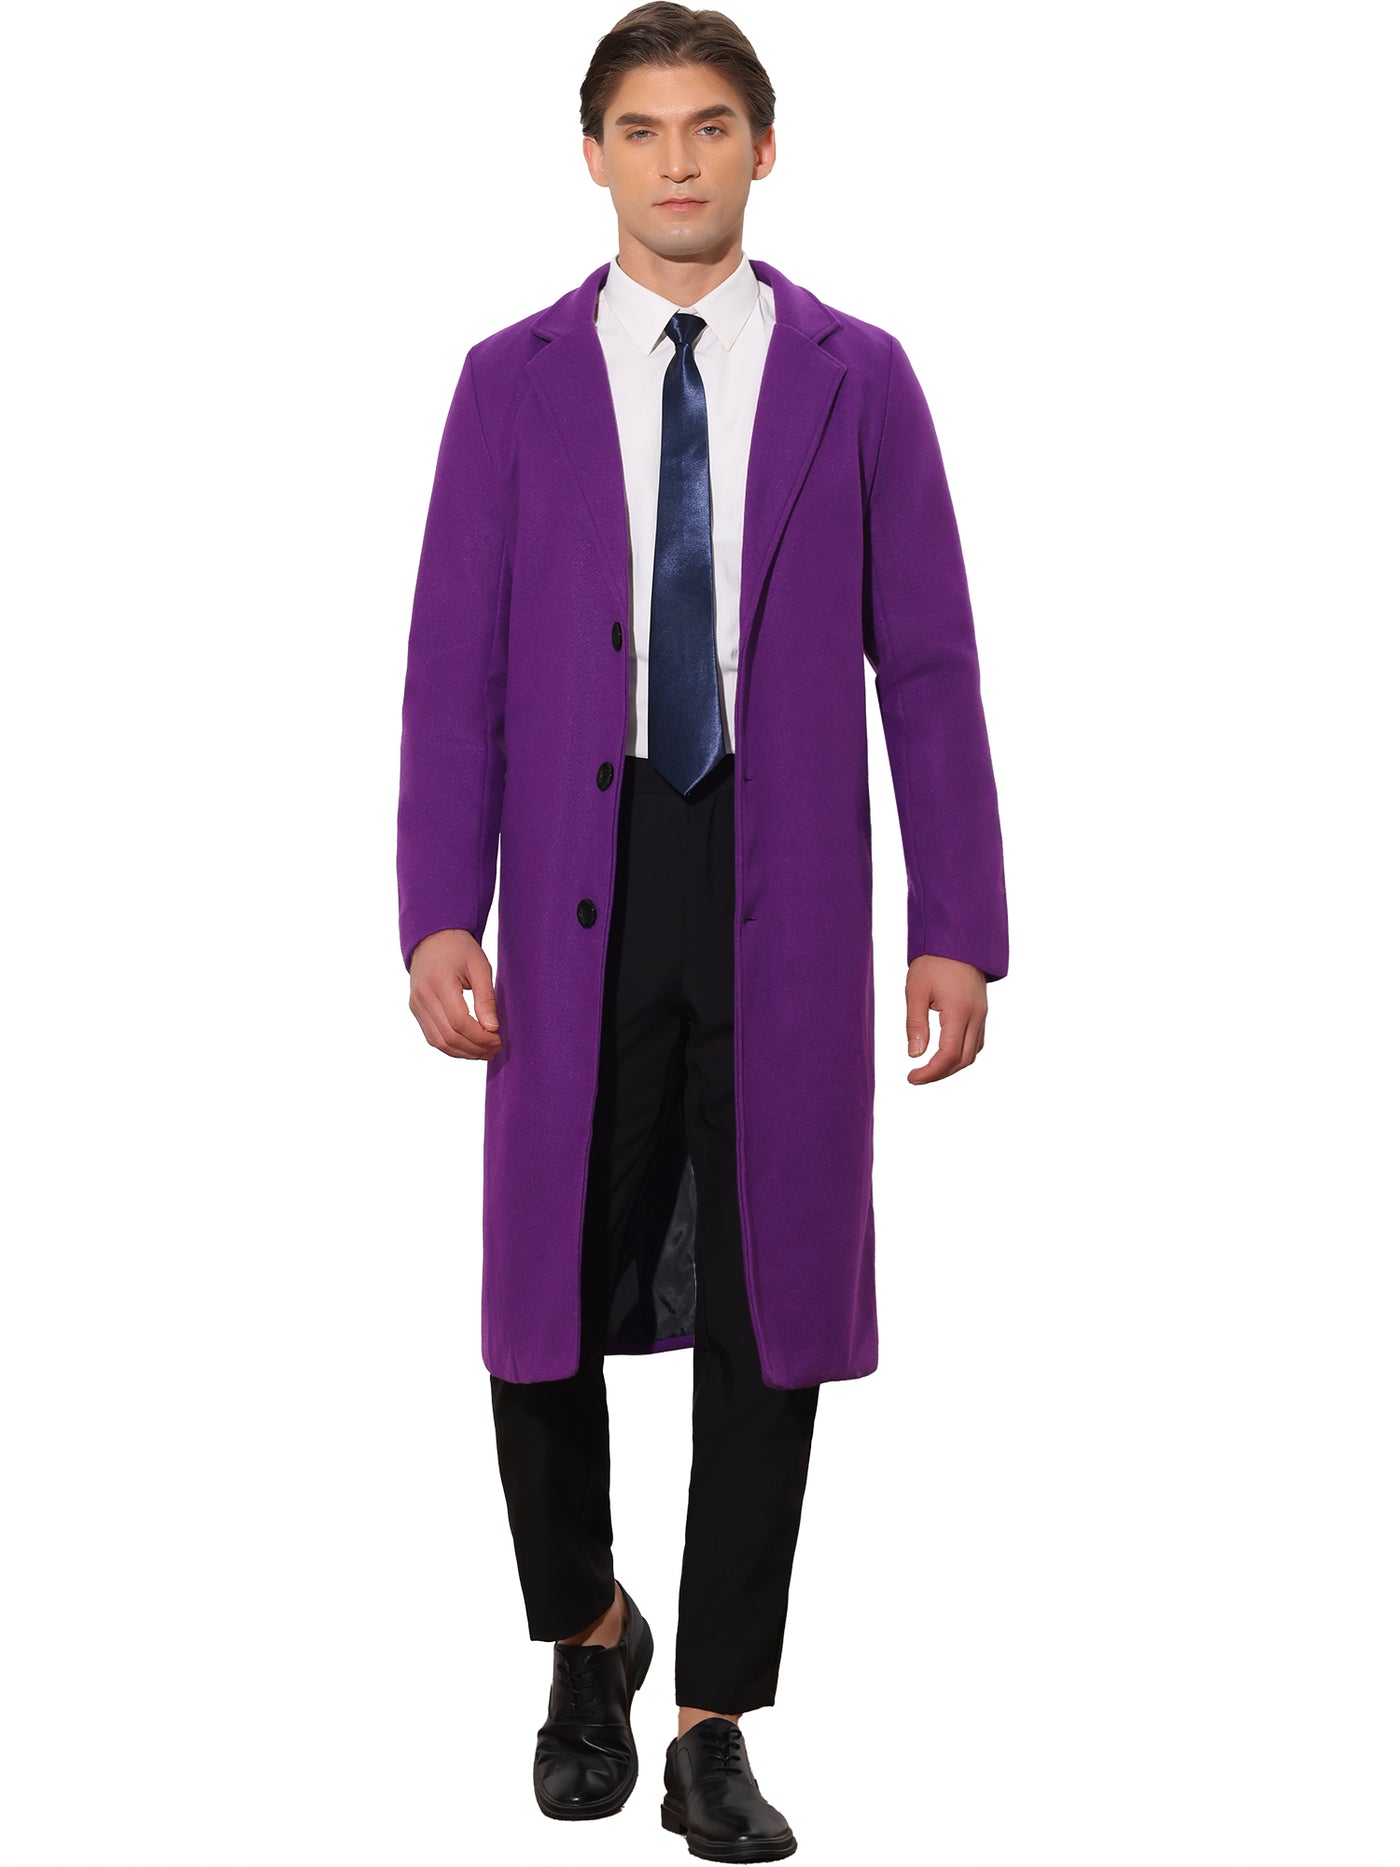 Bublédon Winter Overcoat for Men's Single Breasted Notch Lapel Formal Trench Coats